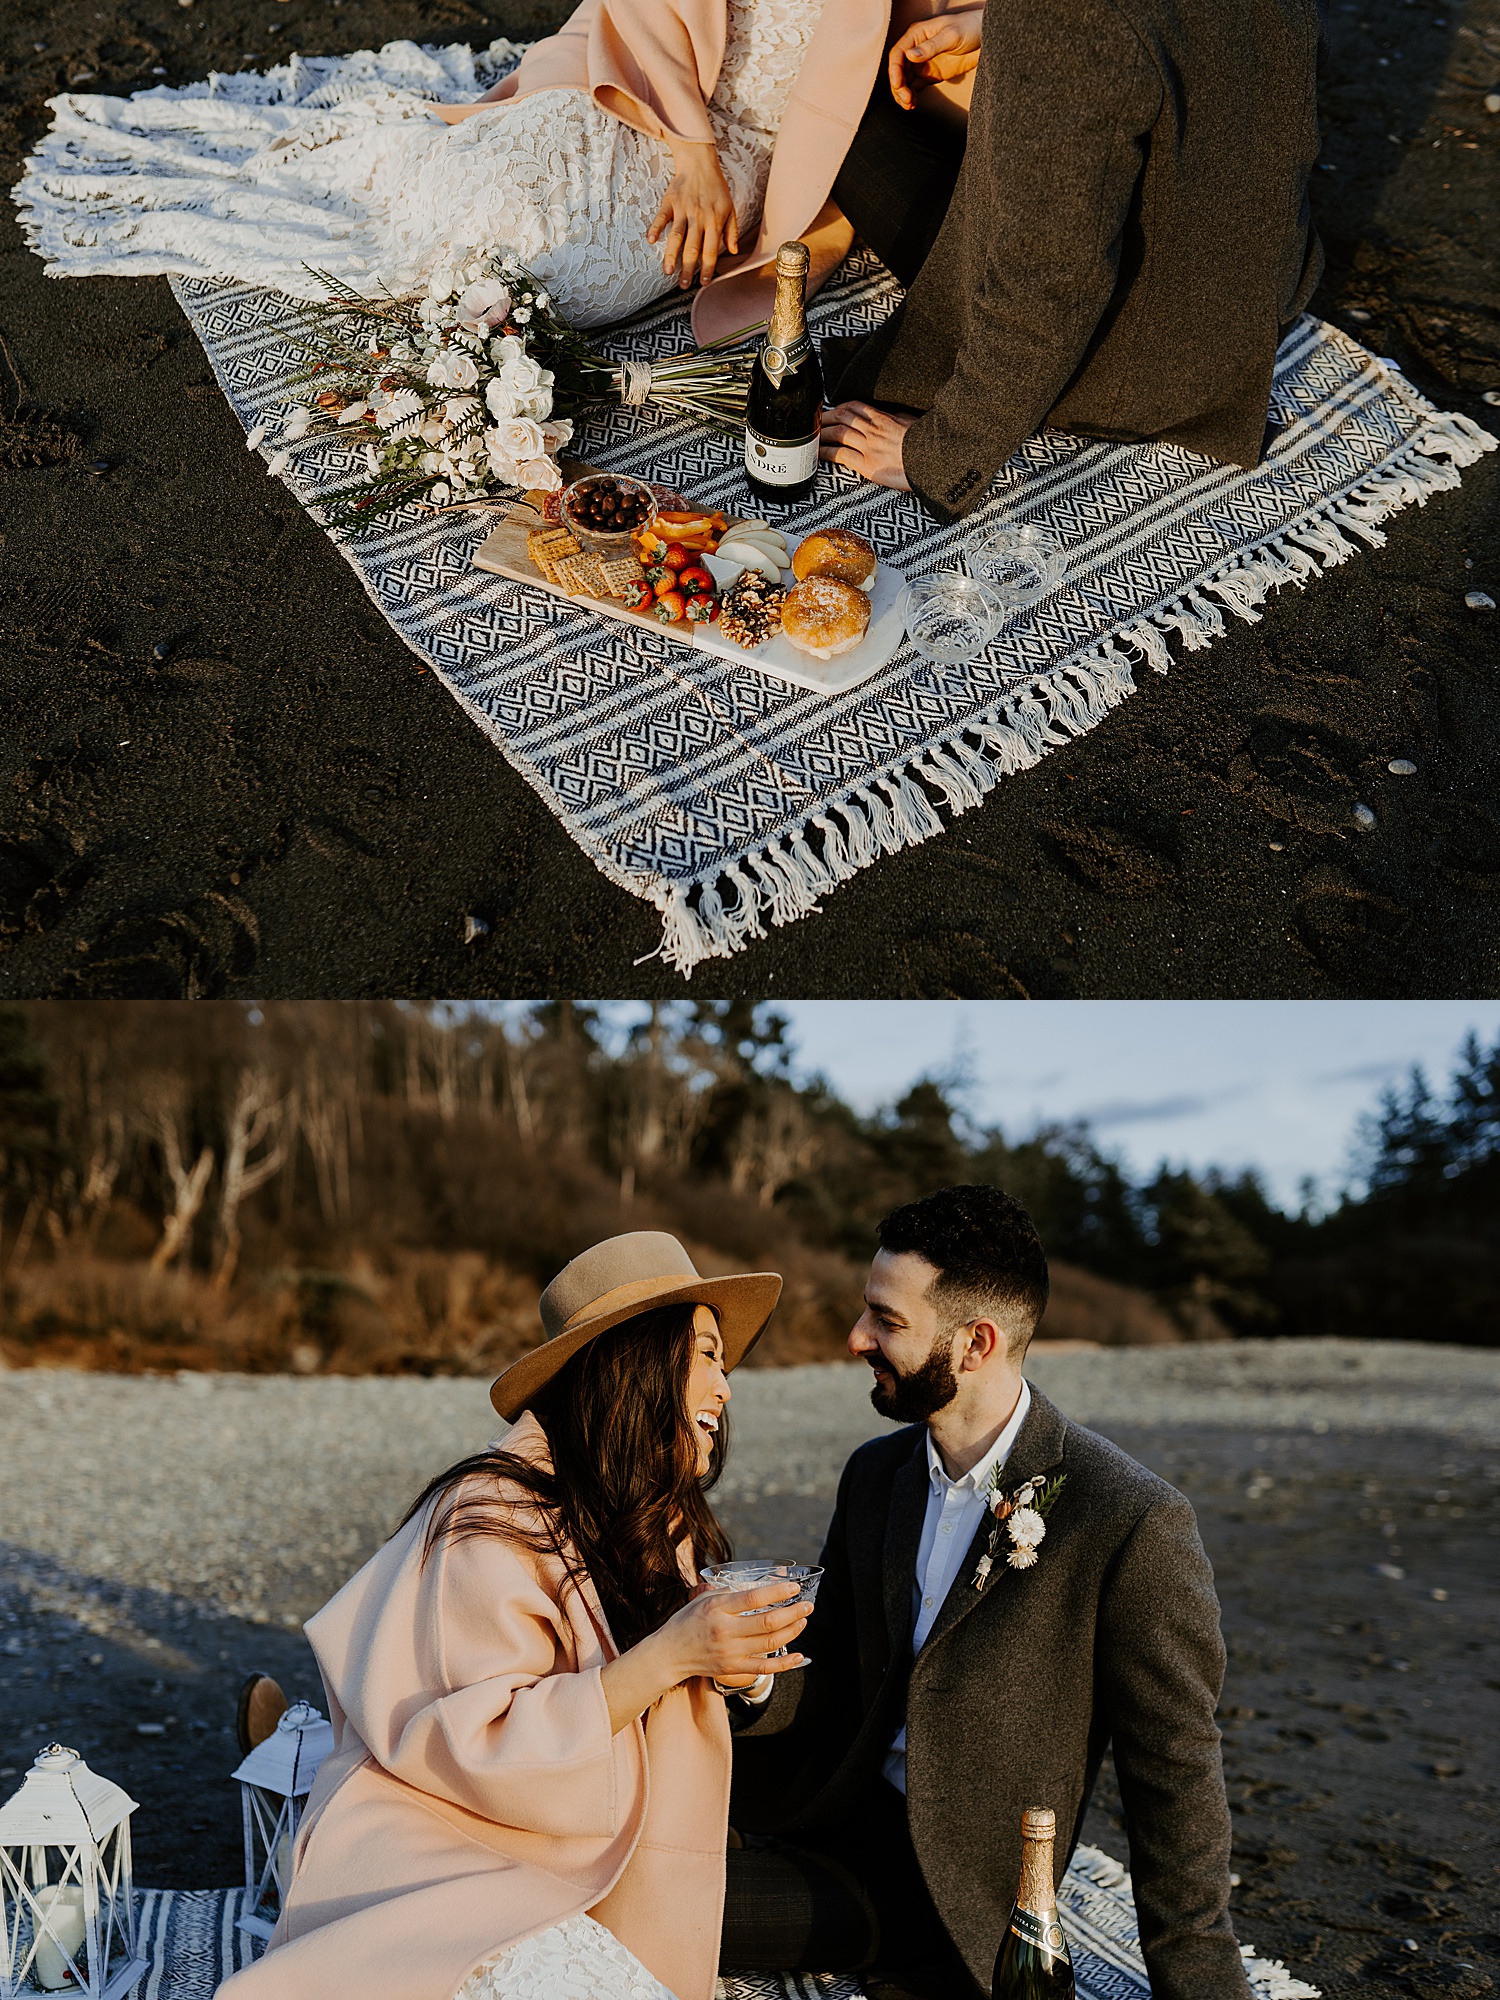 elopement picnic on the washington coast with donuts and a charcuterie board